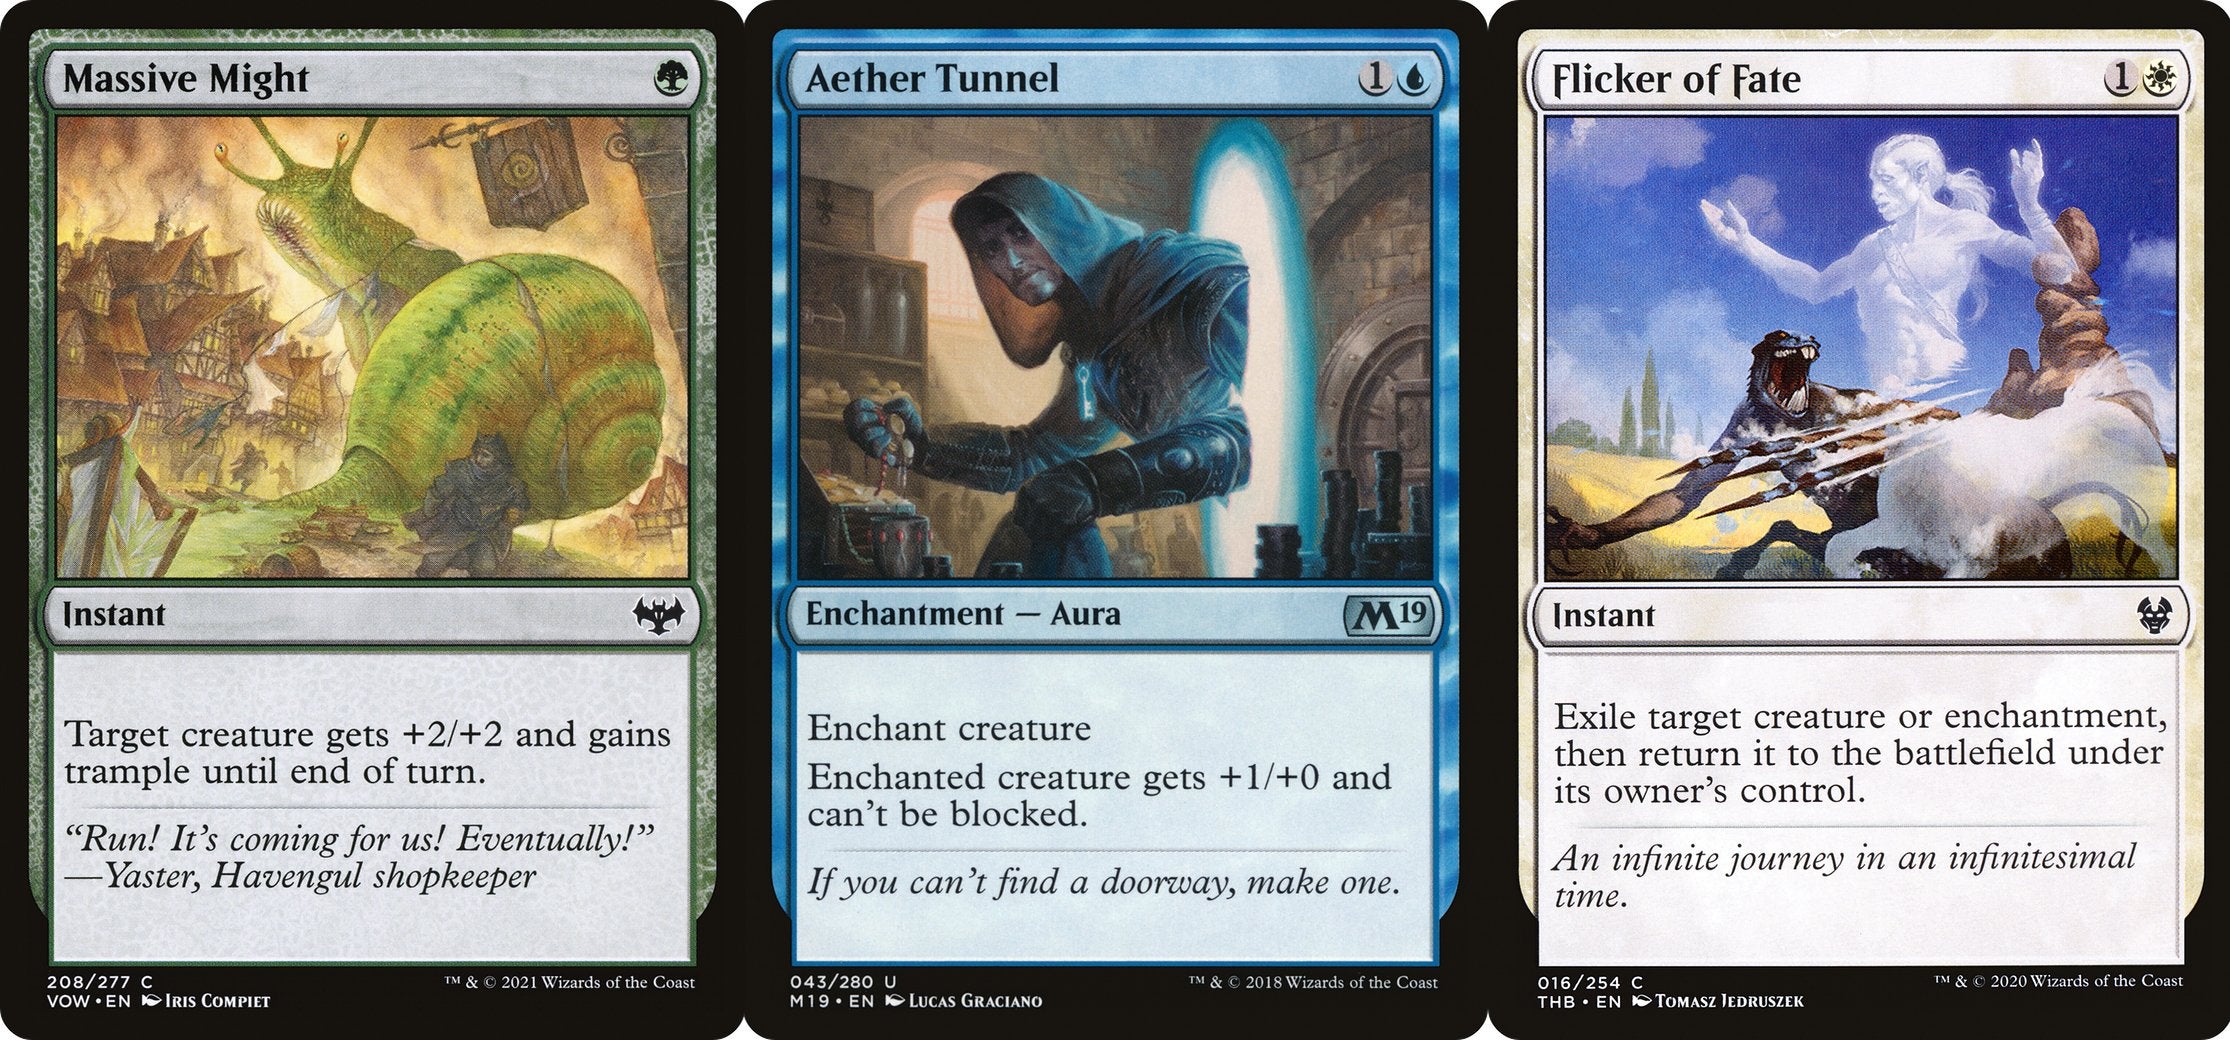 Three cards from Magic: The Gathering: Massive Might, Aether Tunnel, and Flicker of Fate.